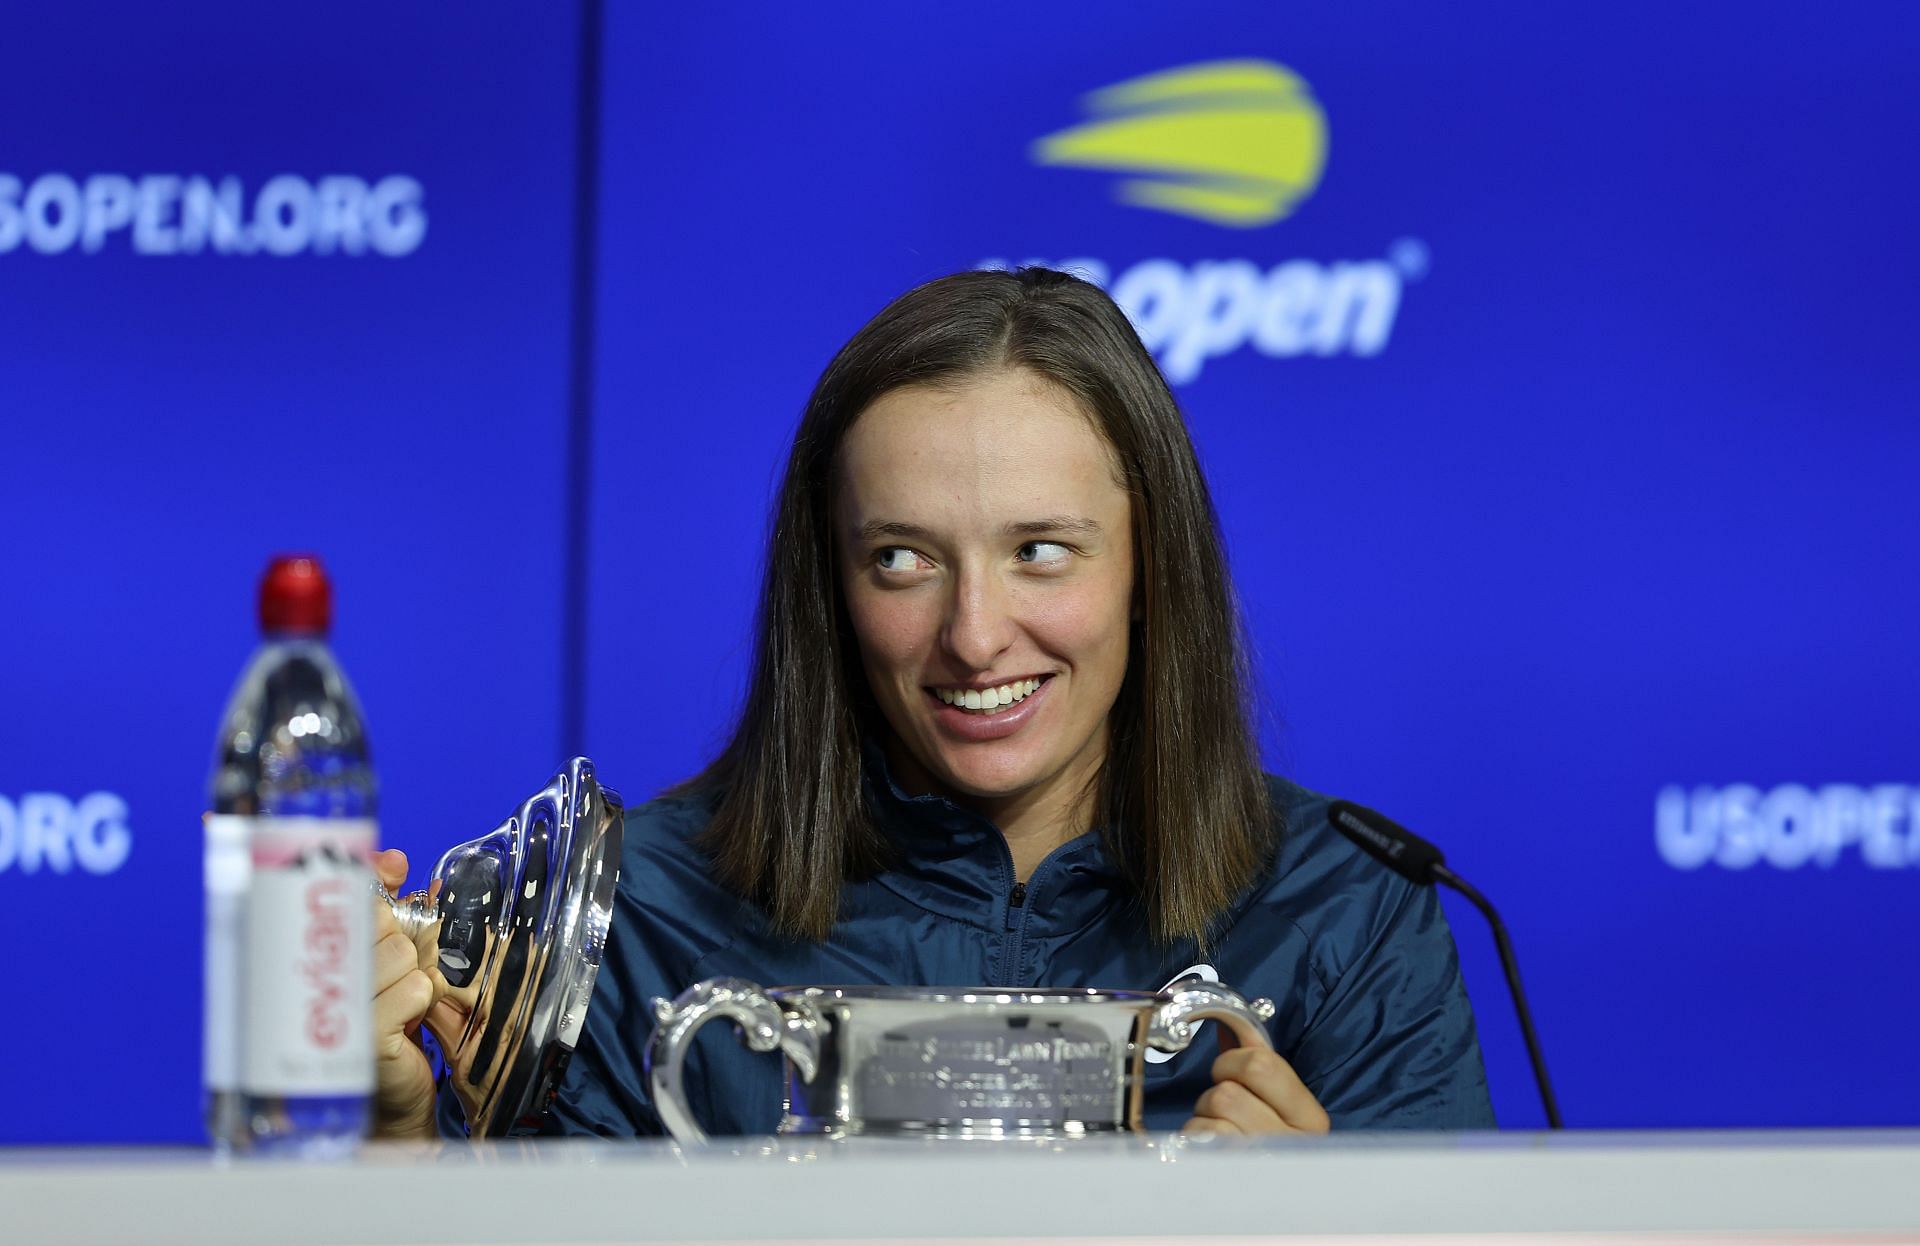 Iga Swiatek loves books and tiramisu, her favoite dessert which she found inside her US Open trophy last month.